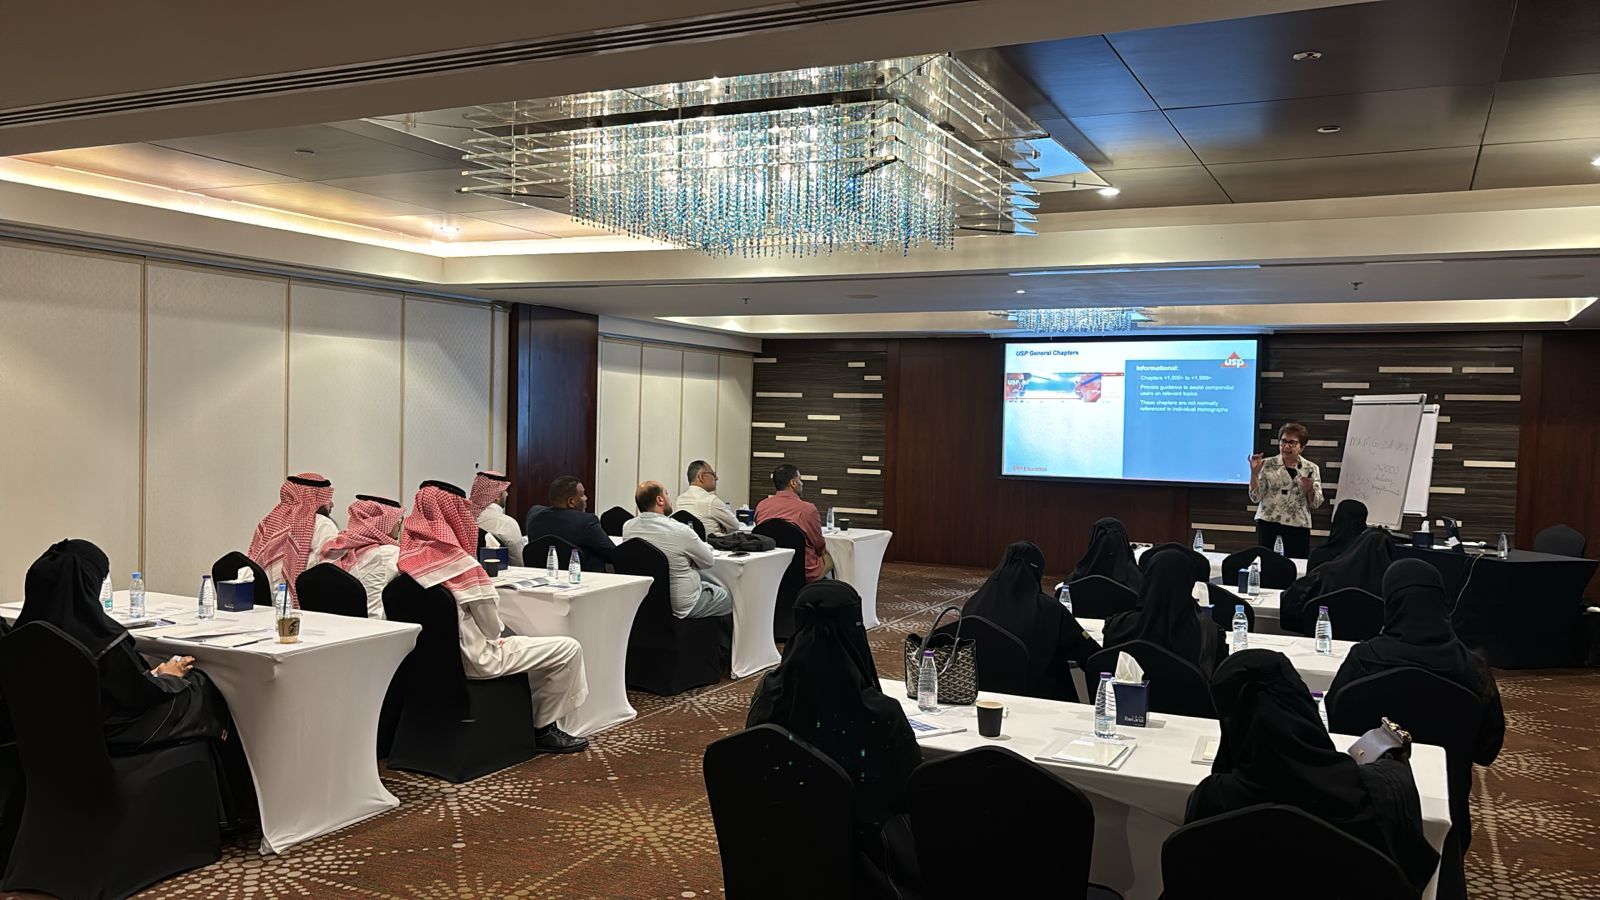 Validation, Verification and Transfer of Analytical Procedures Training Workshop